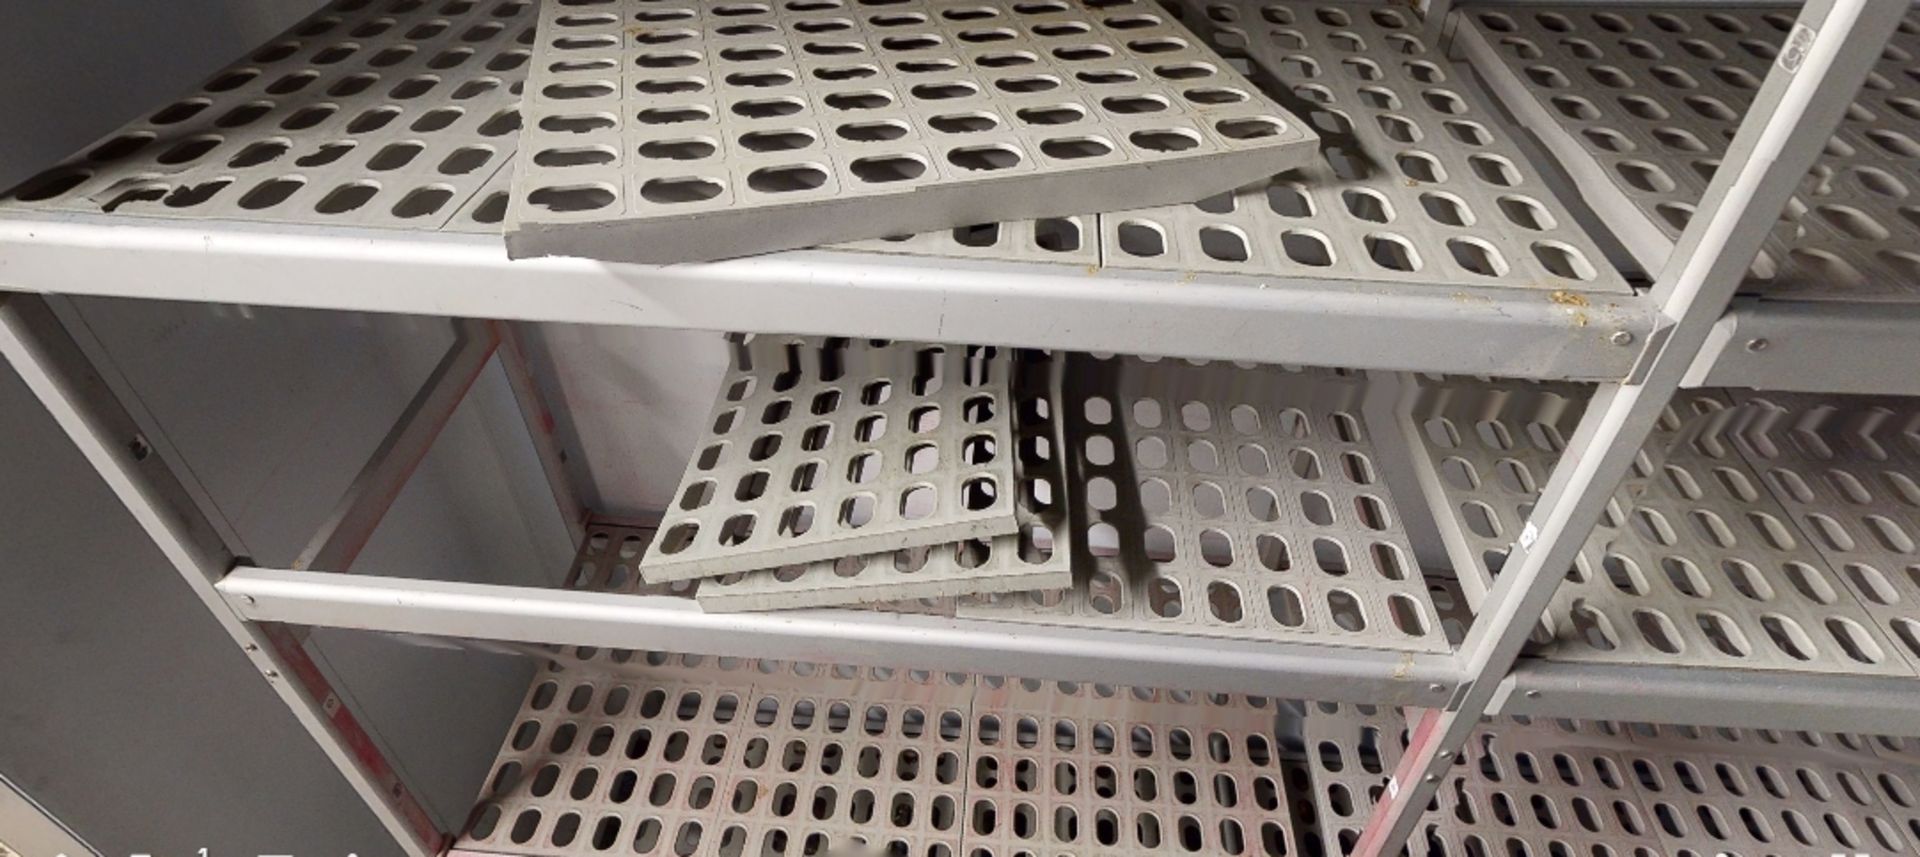 1 x Cold Room Shelving Unit With Aluminium Frame and Perforated Shelf Panels - U Shaped - Image 8 of 8